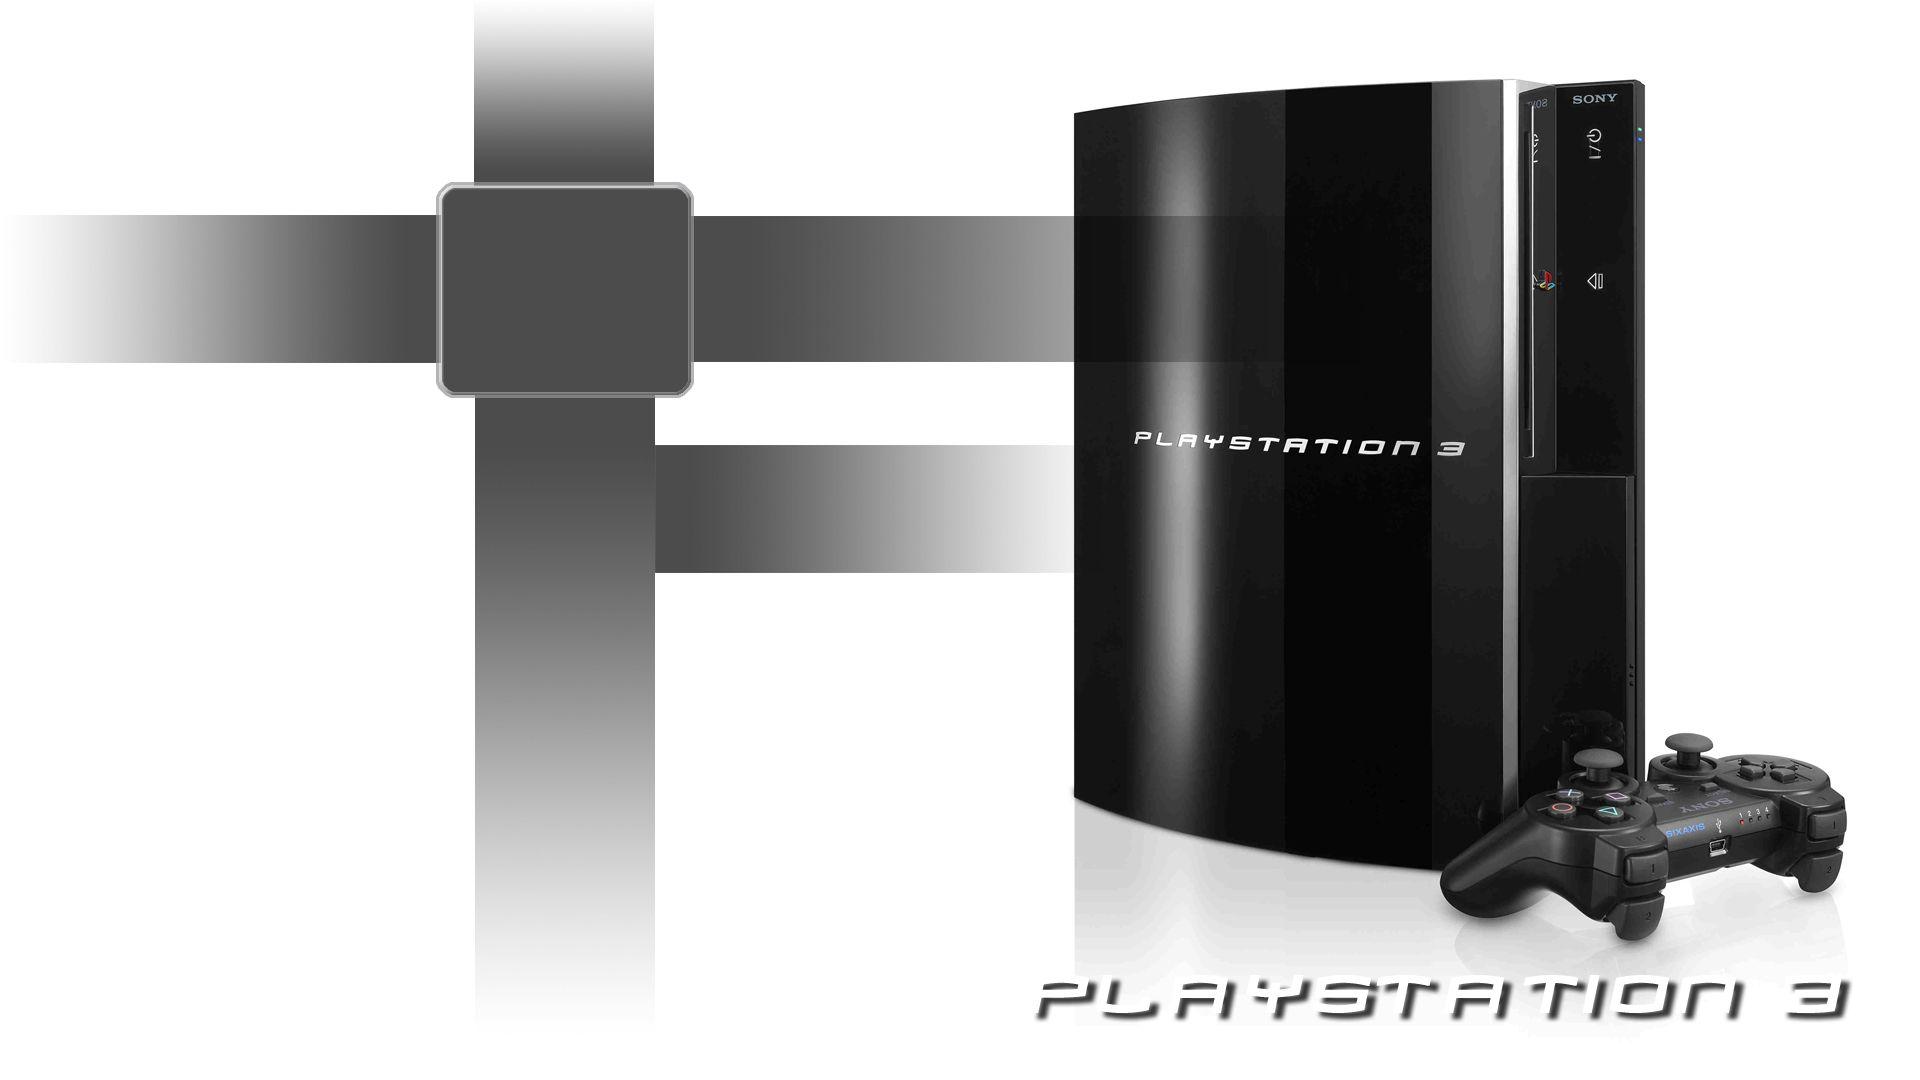 PlayStation 3 wallpaper and image, picture, photo